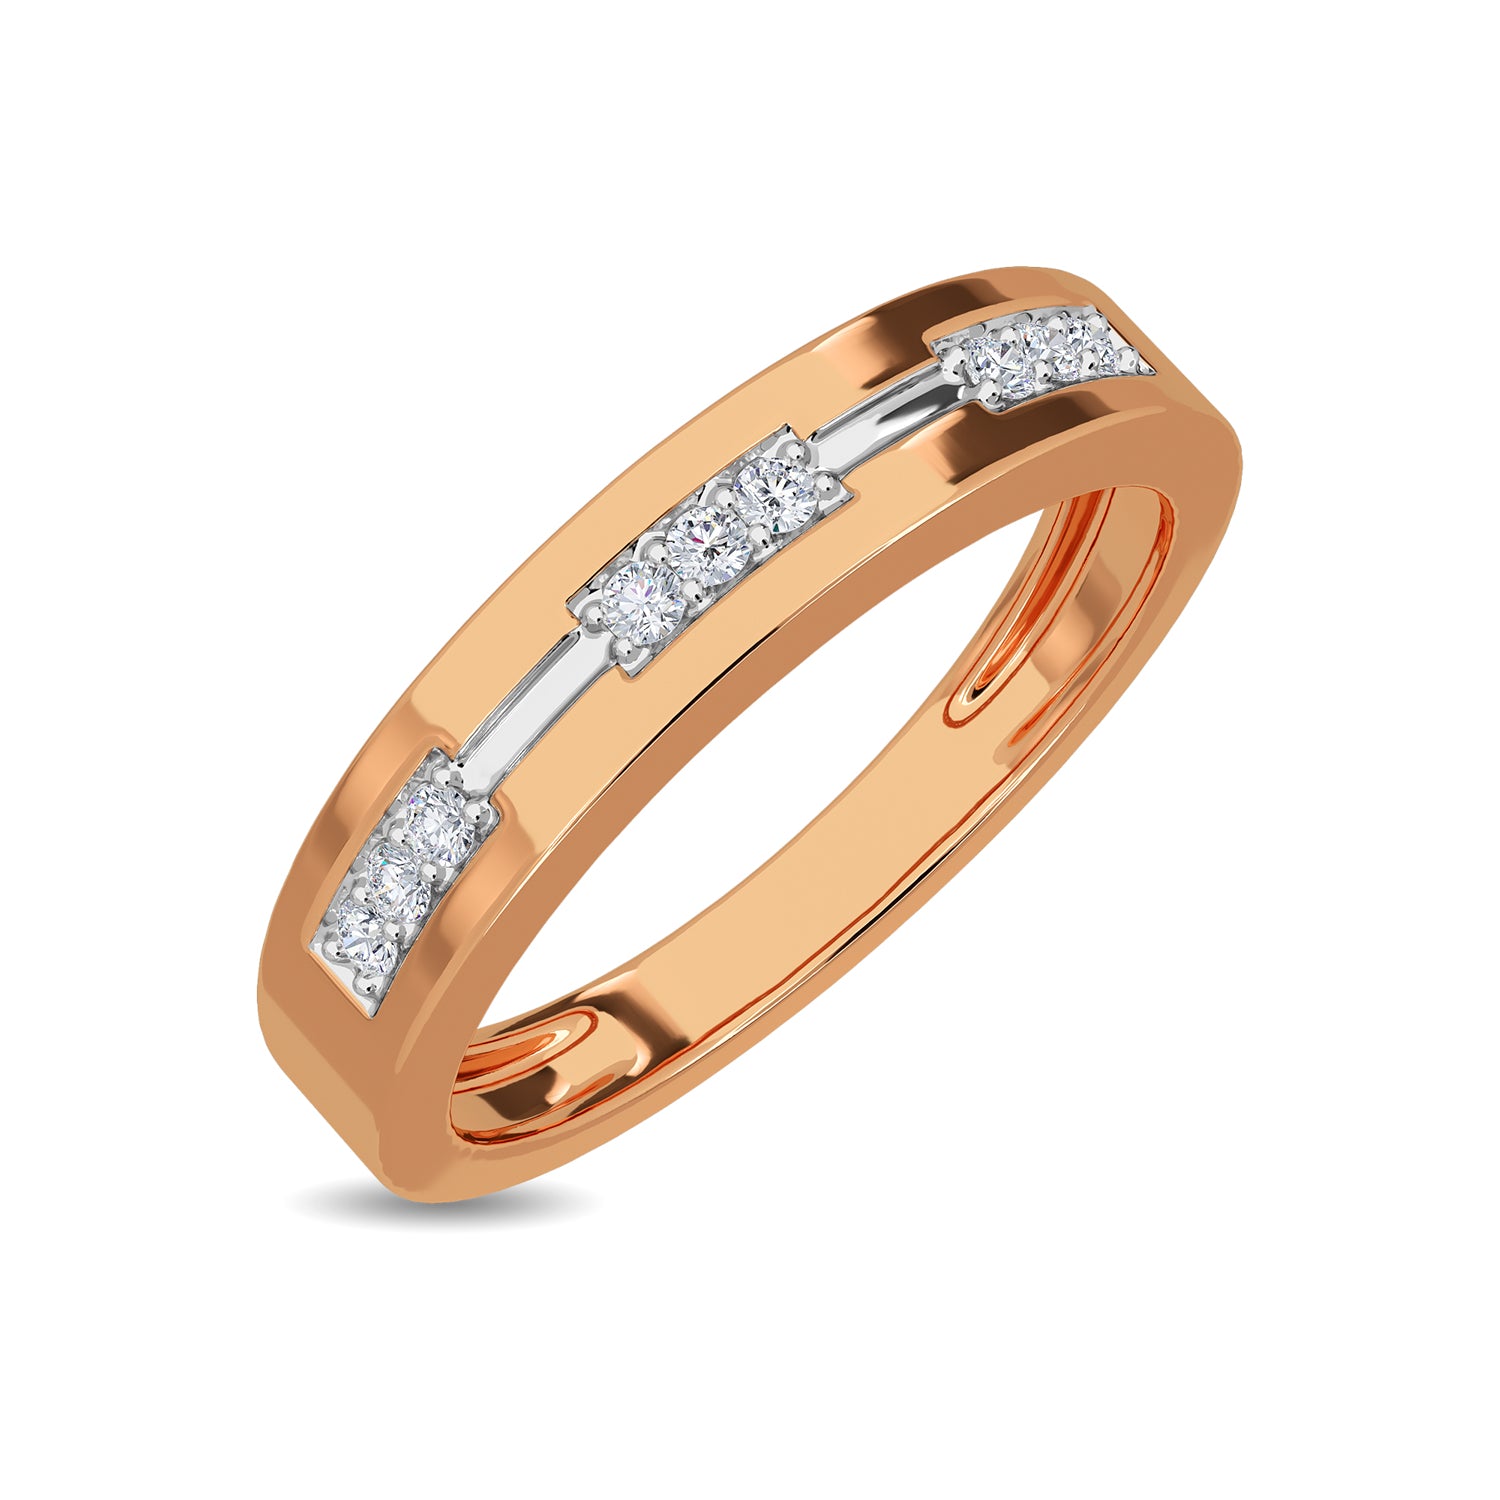 Buy KISNA Real Diamond Jewellery 14KT Rose Gold SI Diamond Ring for Men |  Confident S7 at Amazon.in